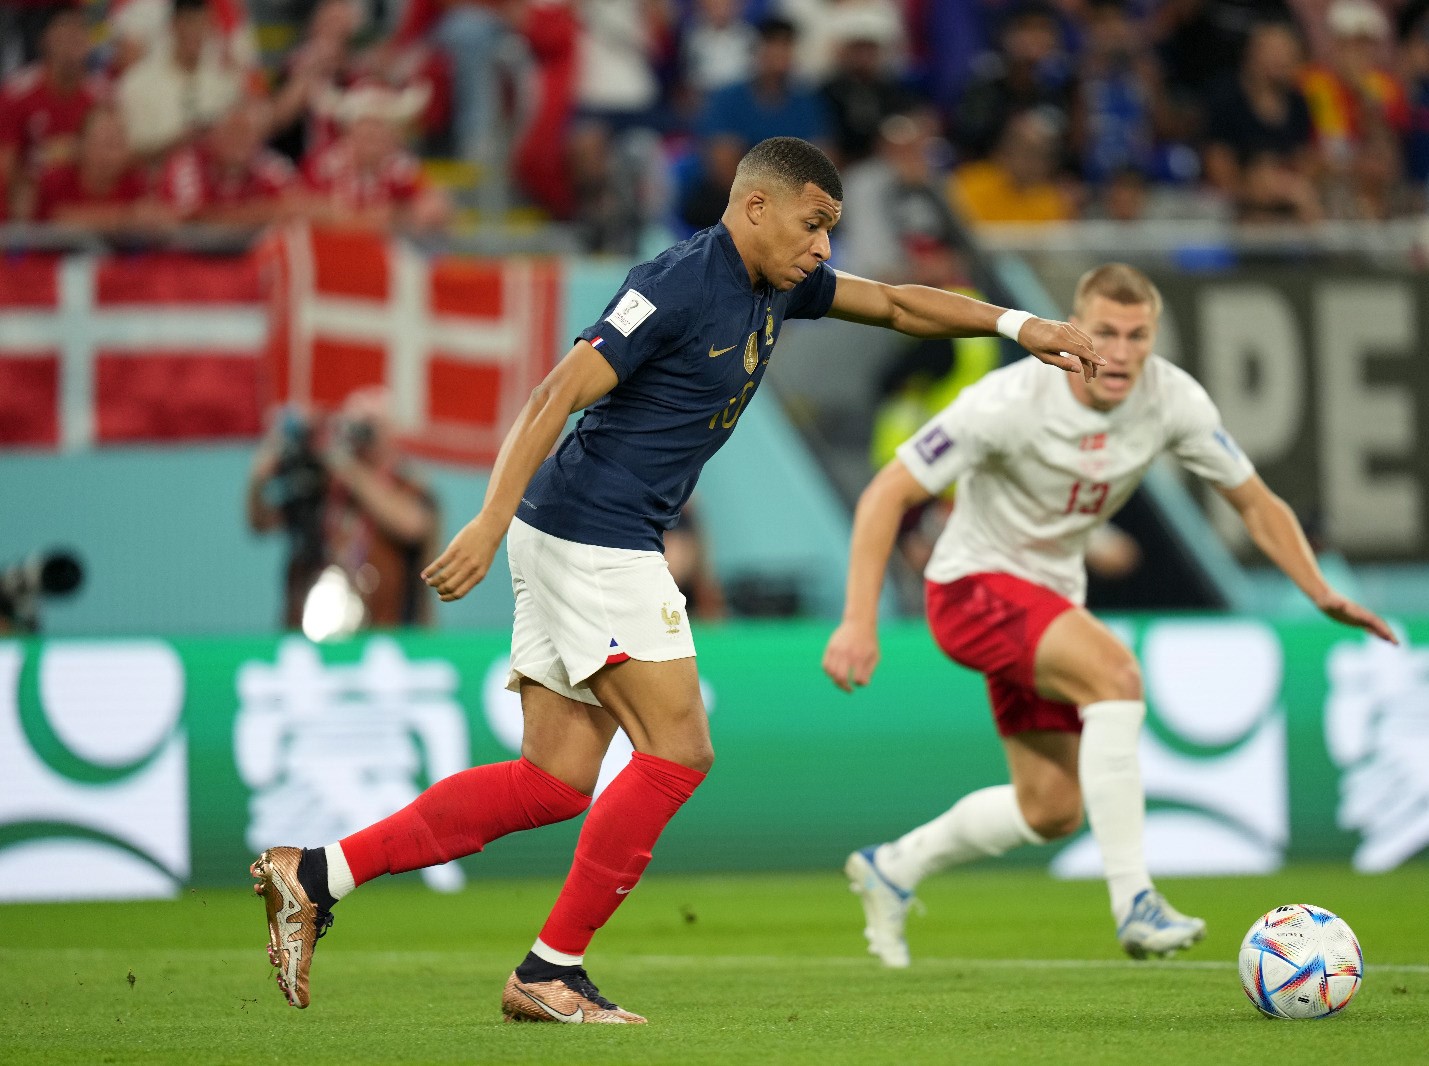 Striker Killian Mbappe led his French team to victory by scoring two goals